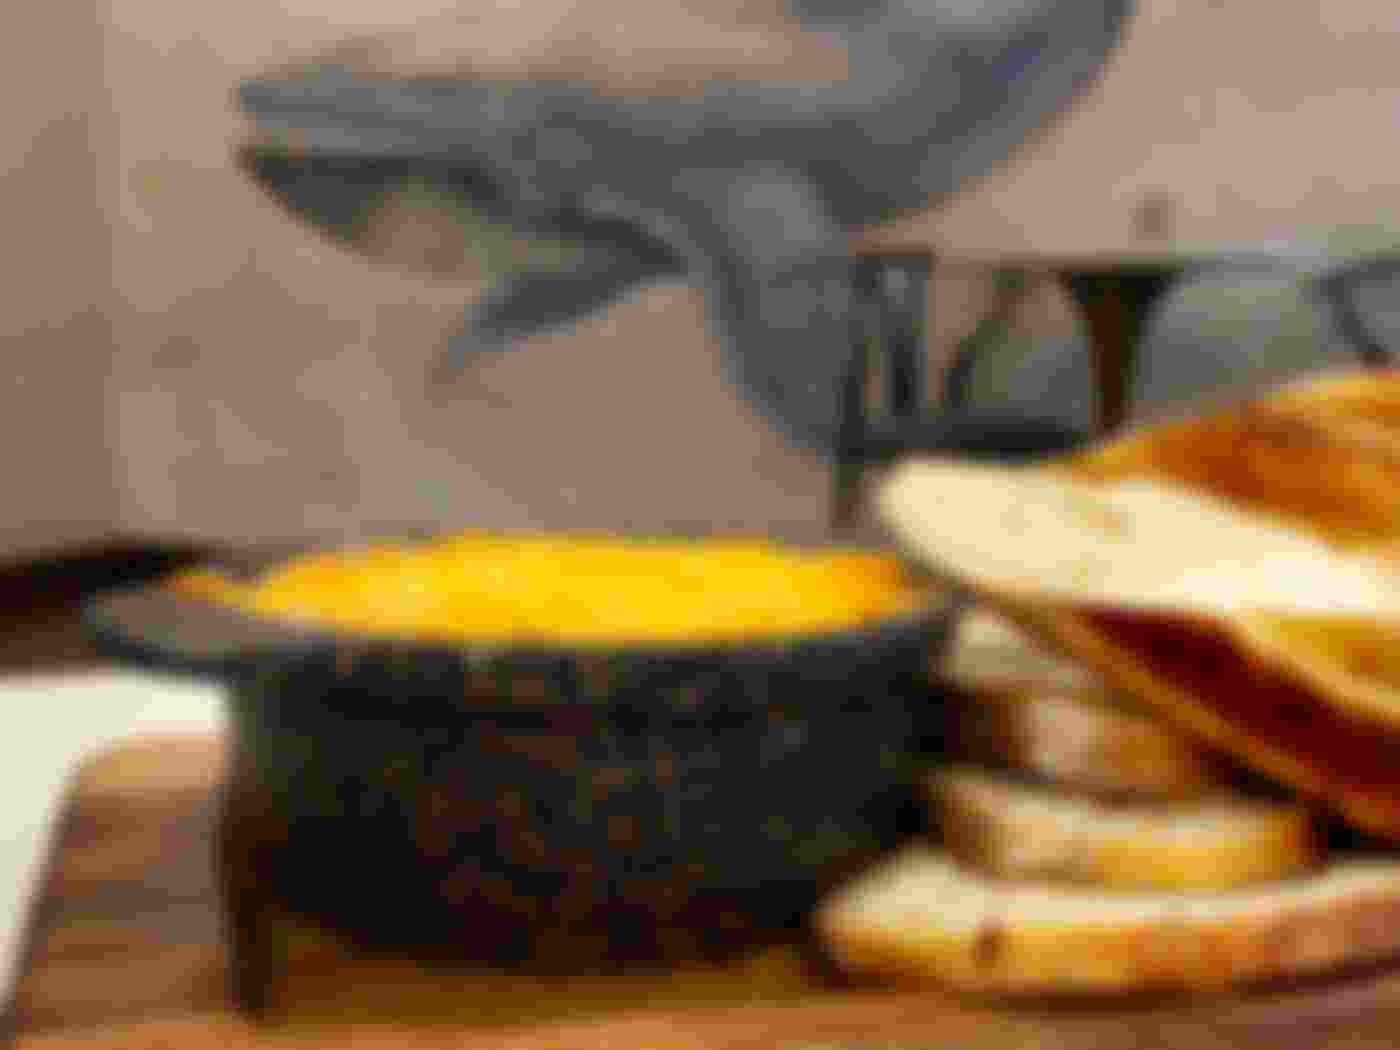 bread with cheese sauce on wooden board with whale on wall in background